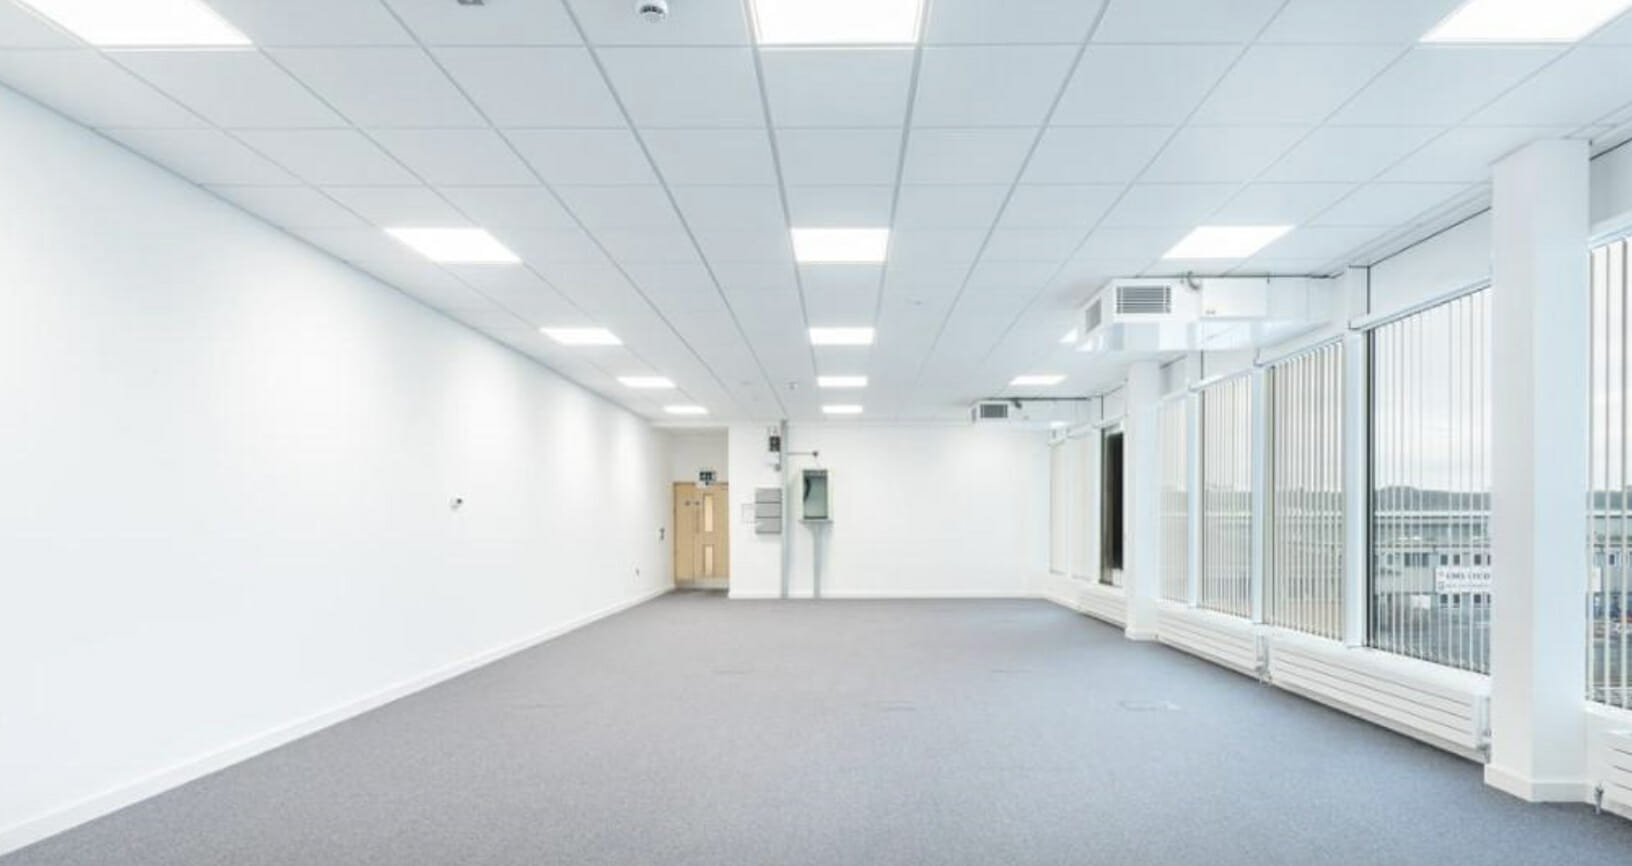 Office refit? Go to the wall to minimise energy costs, maximise floor space